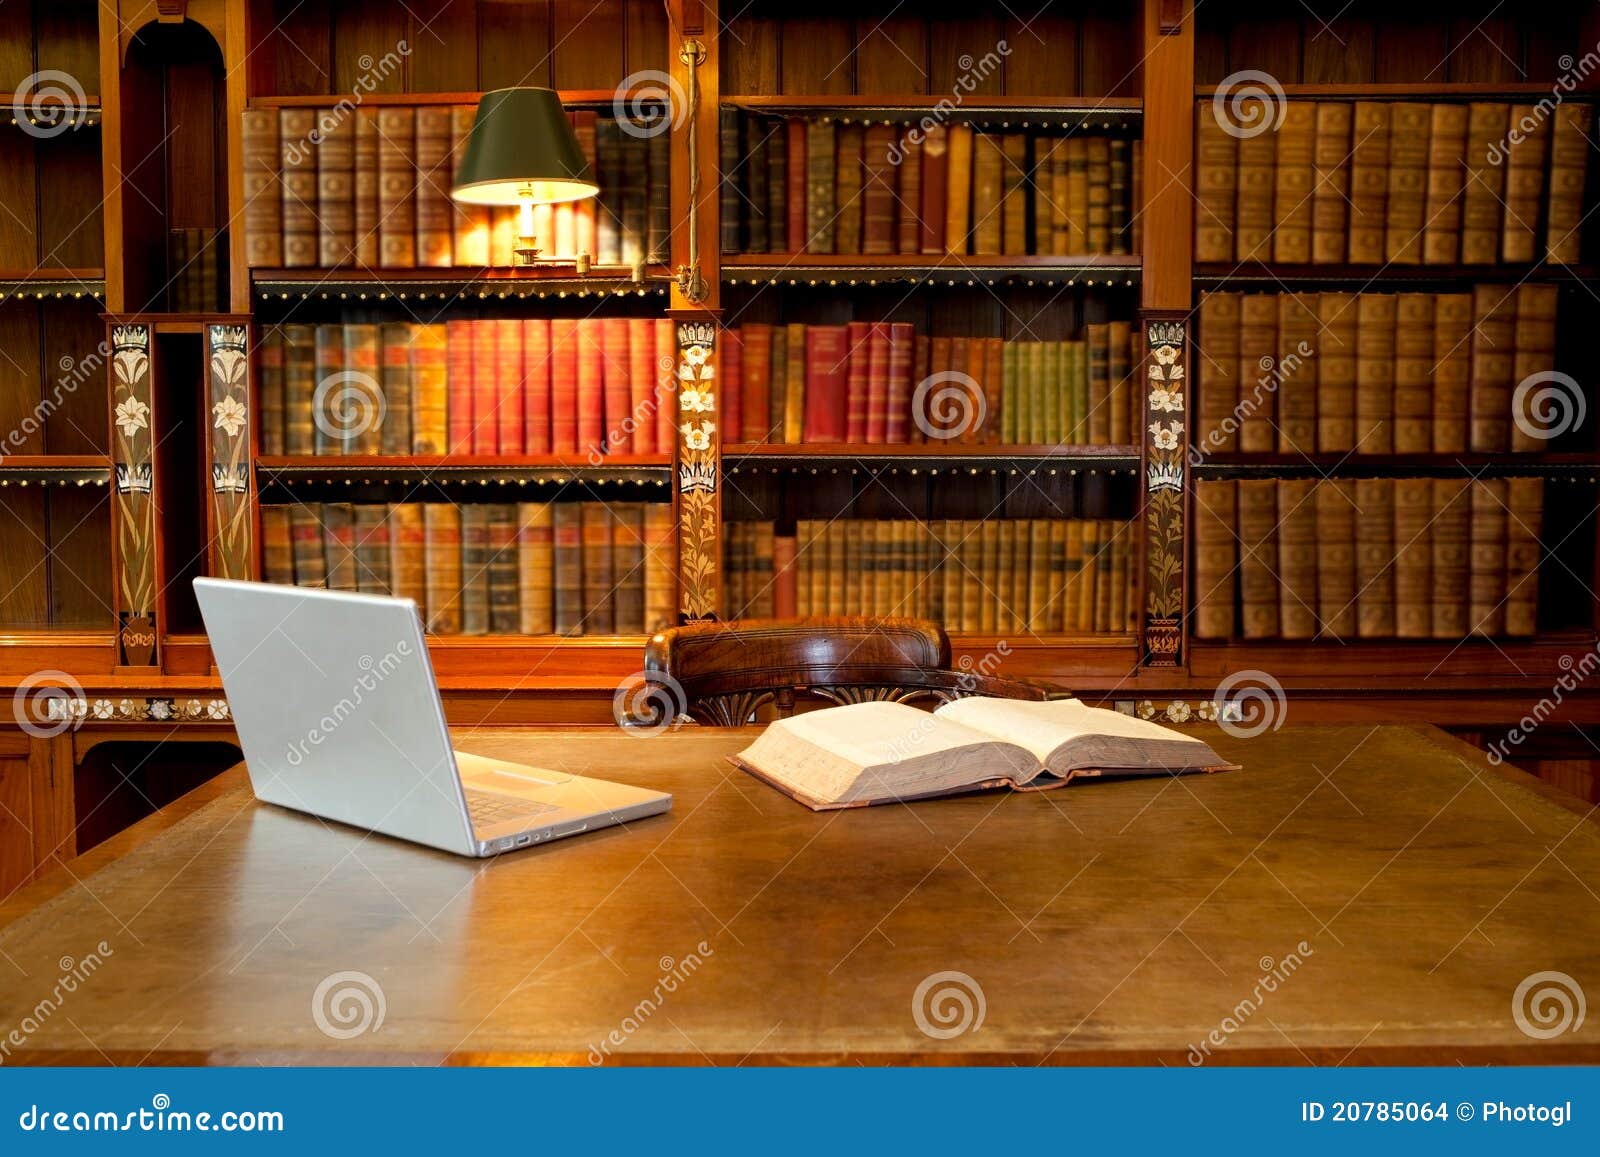 library, computer and desk